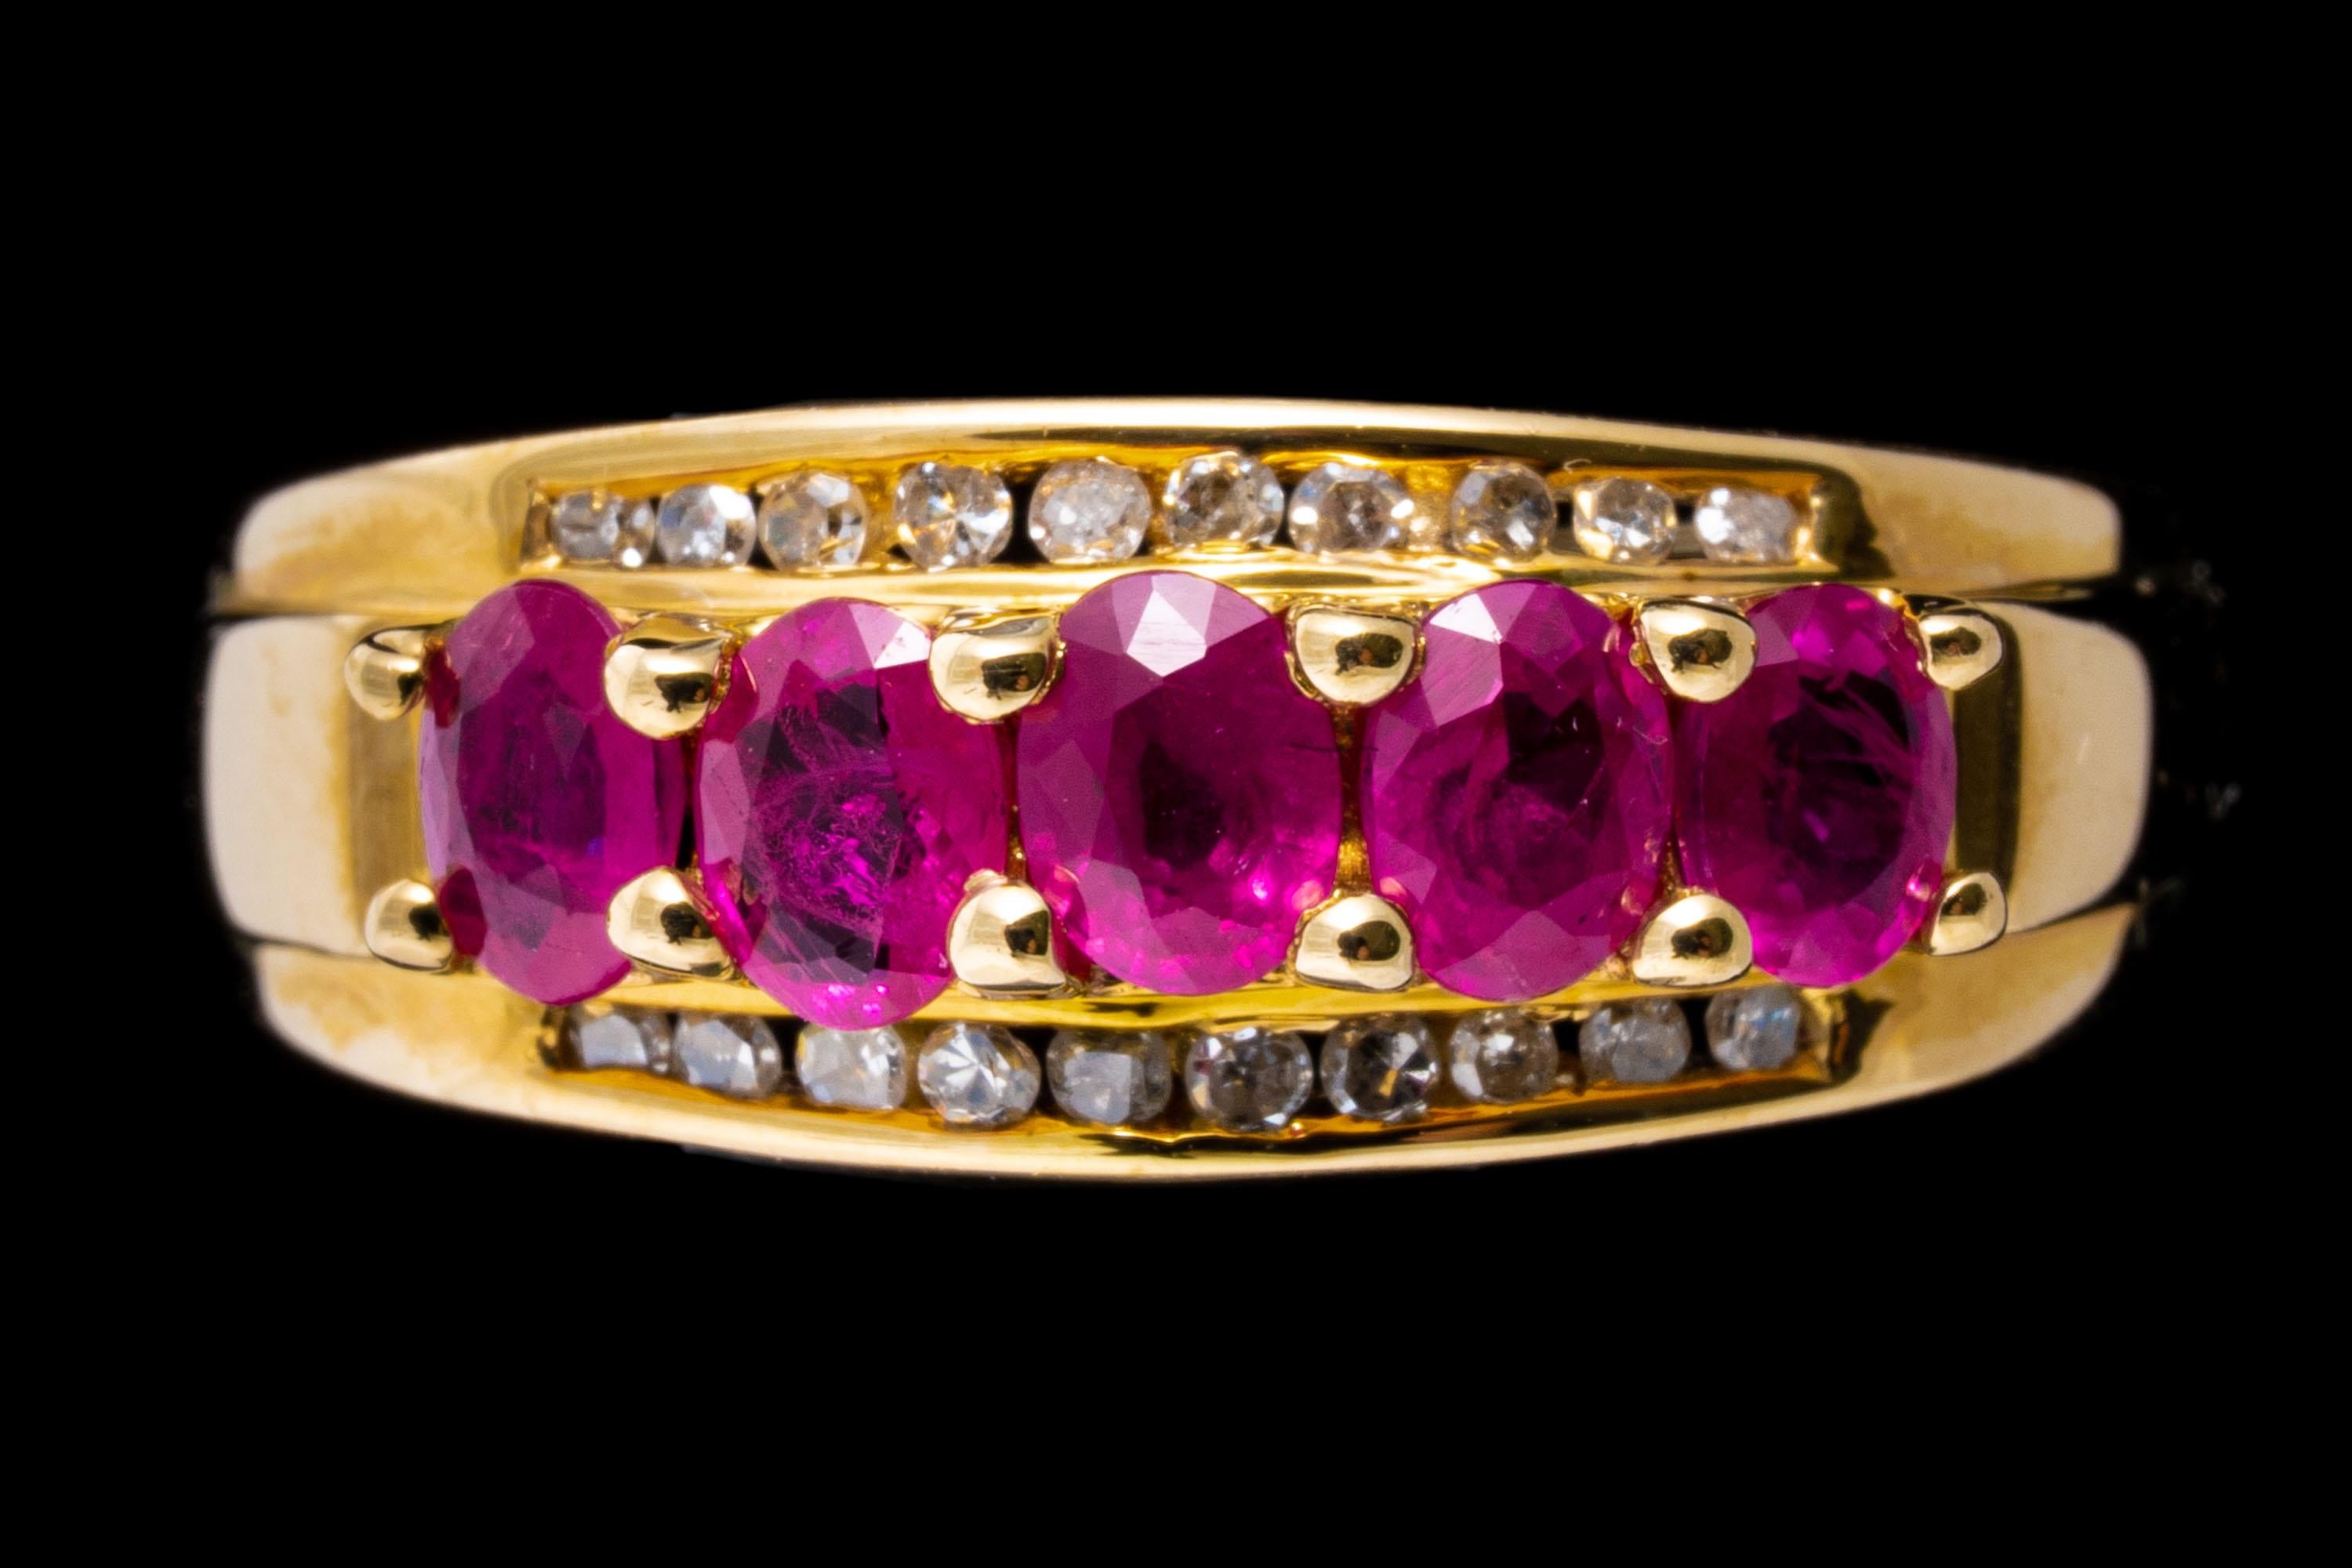 14k yellow gold ring. This handsome yellow gold ring is a three row band style, set with a center row of oval faceted, reddish pink color rubies, approximately 0.80 TCW, prong set and flanked by a trim of round faceted diamonds, approximately 0.10